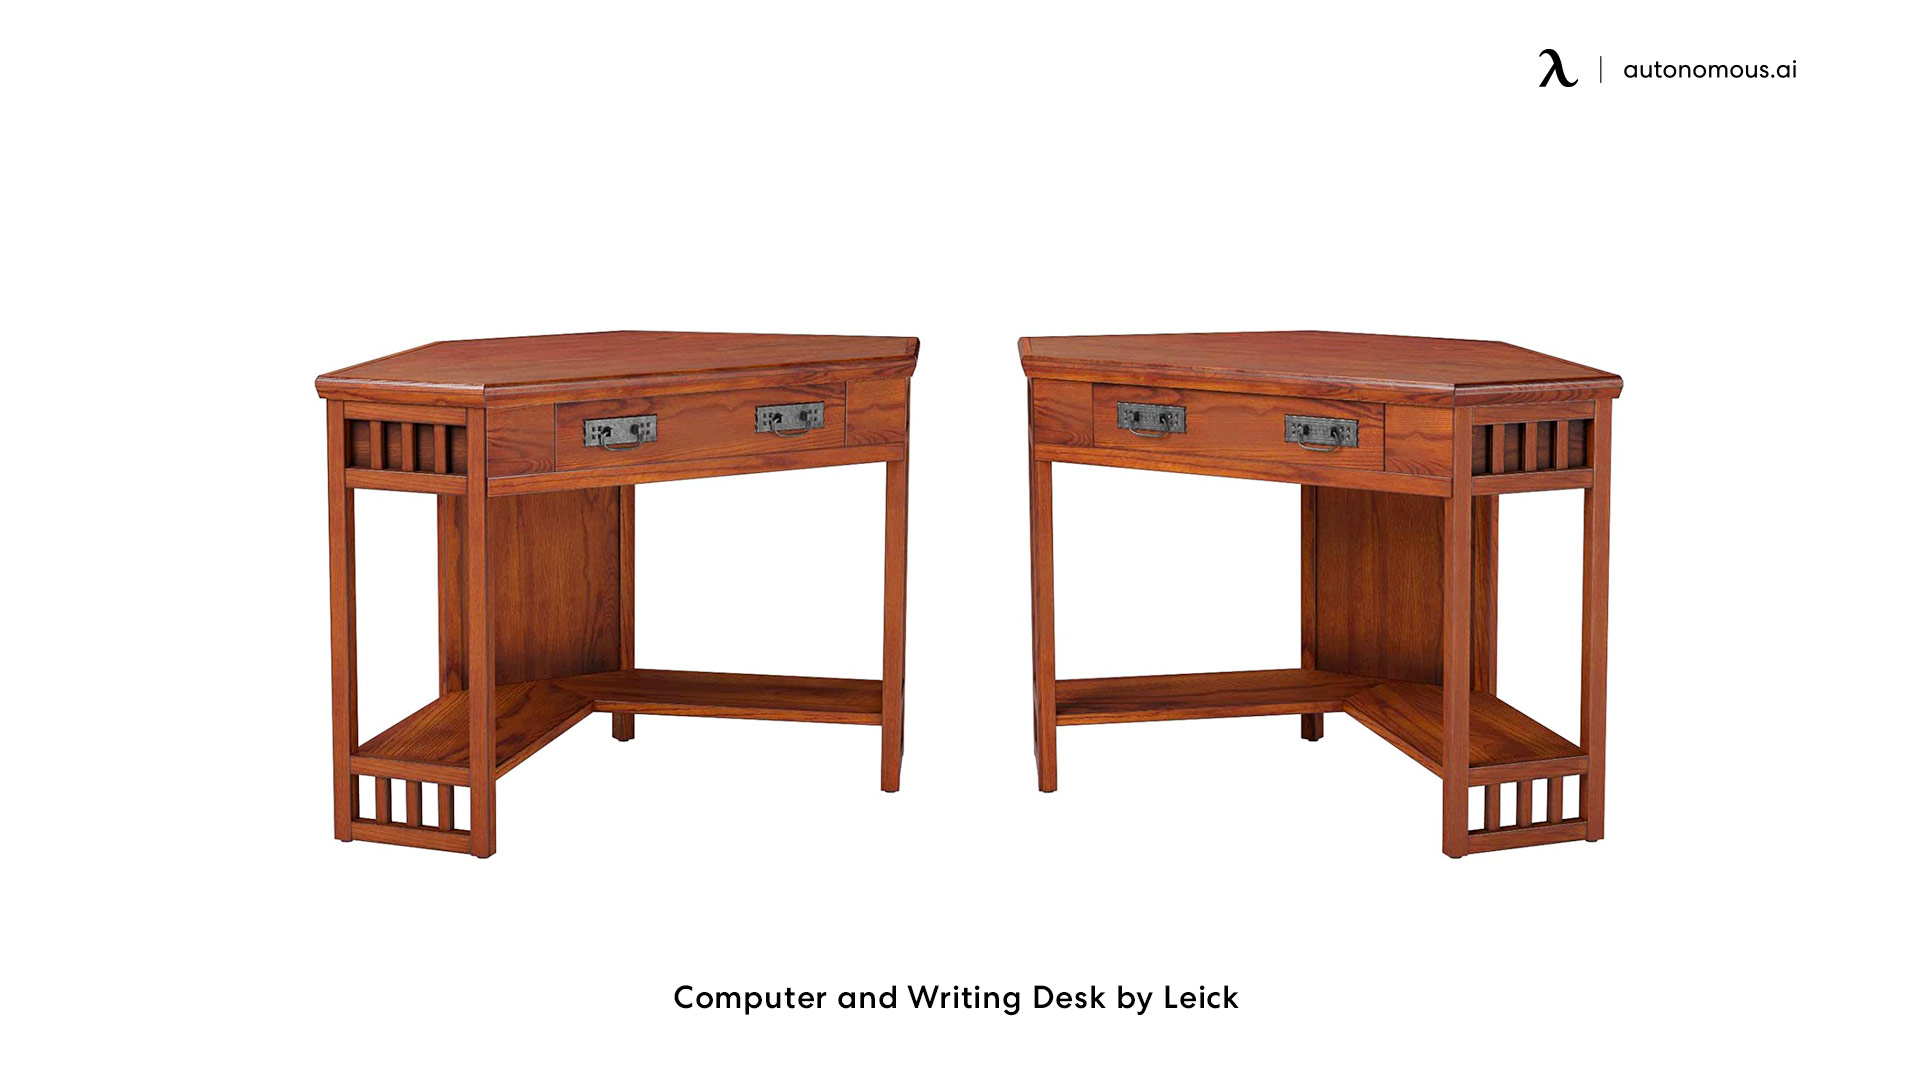 Computer and Writing Desk by Leick